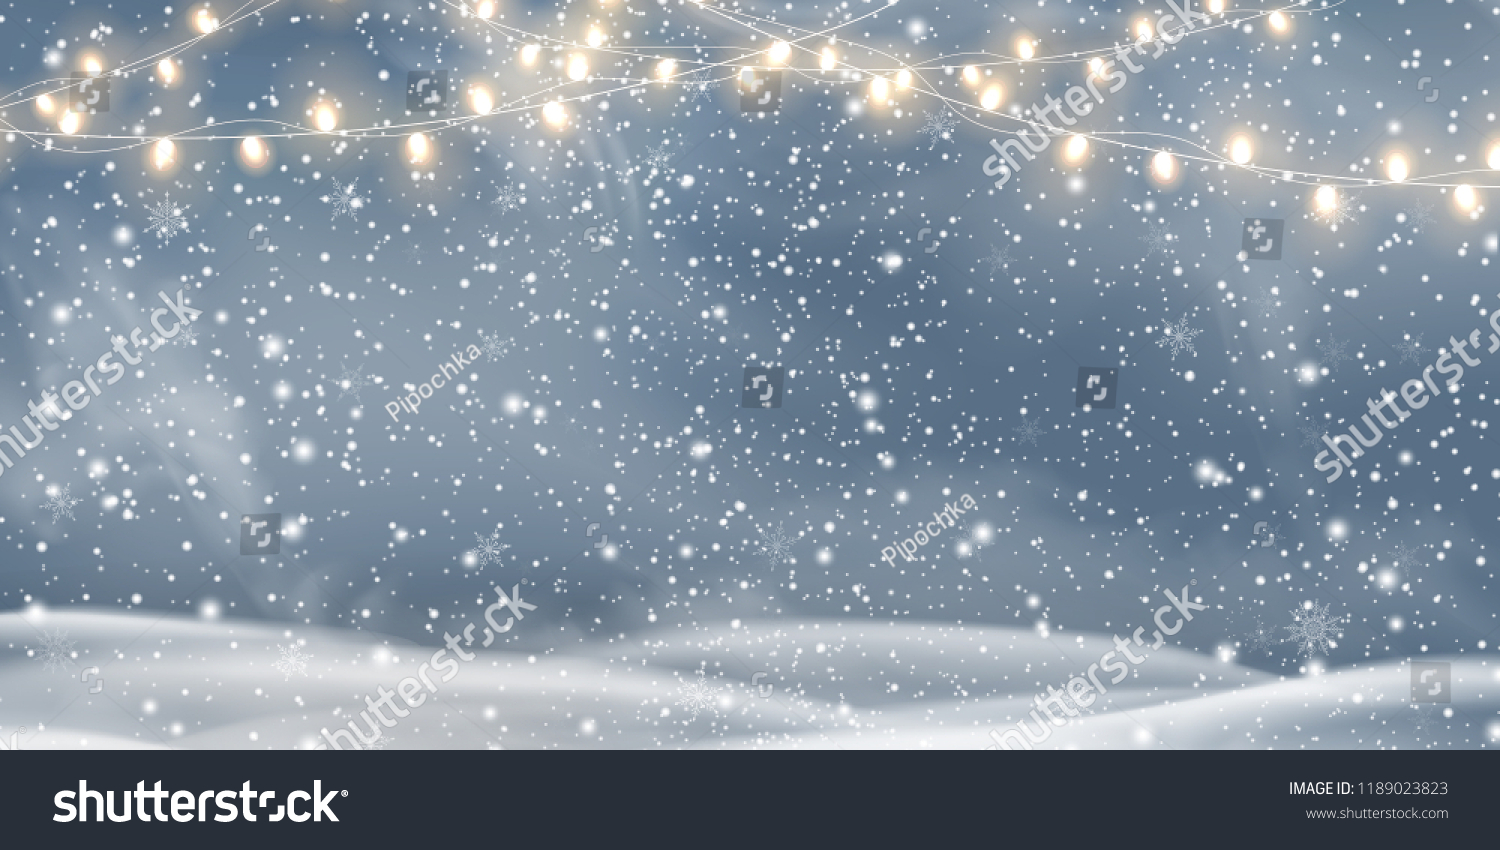 Snowy night with light garlands, falling snow, snowflakes,  snowdrift for winter and new year holidays. Holiday winter landscape. Christmas vector background. #1189023823